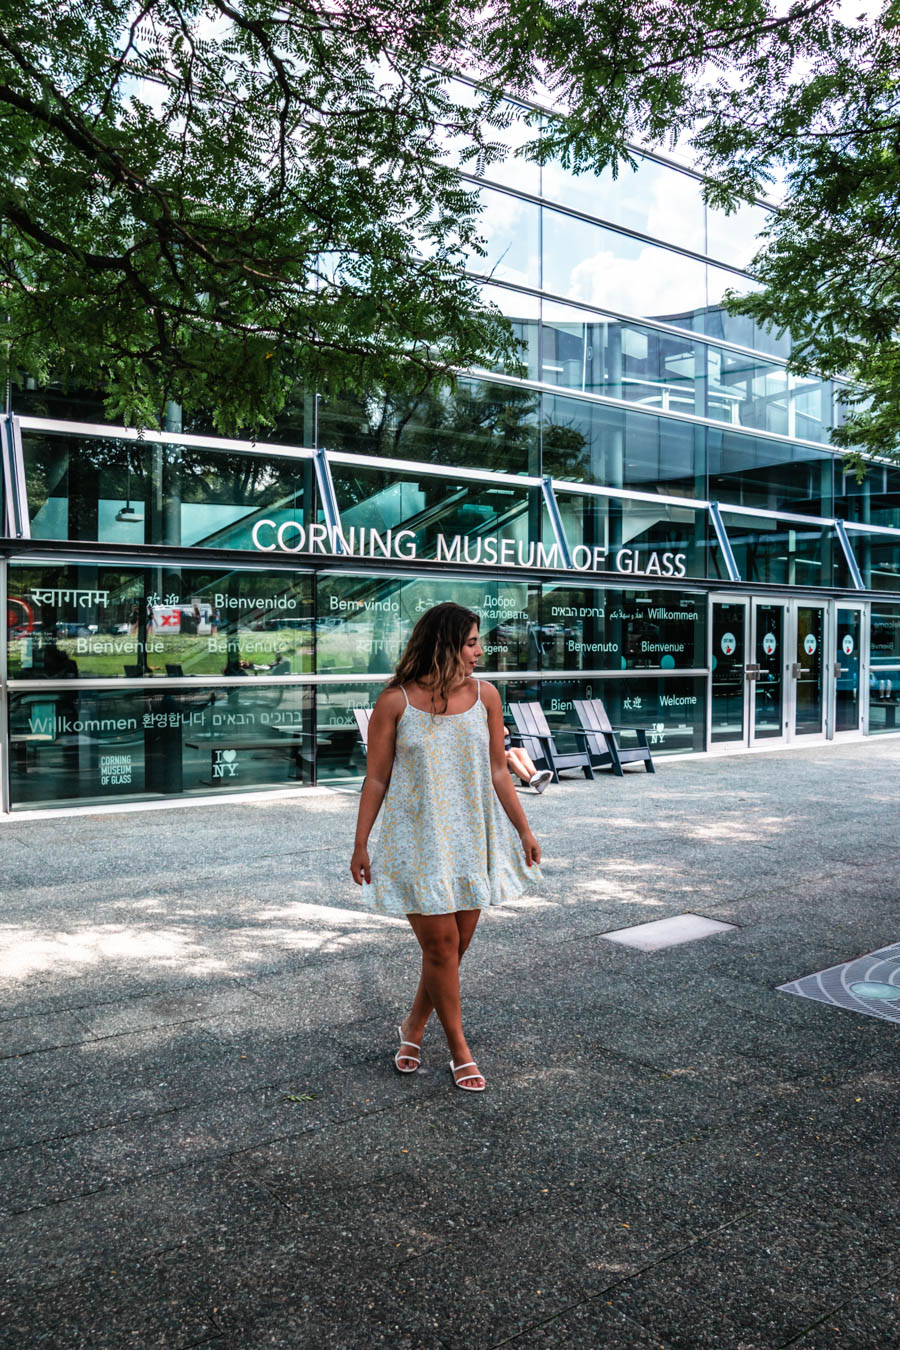 Corning Museum of Glass Exterior with girl